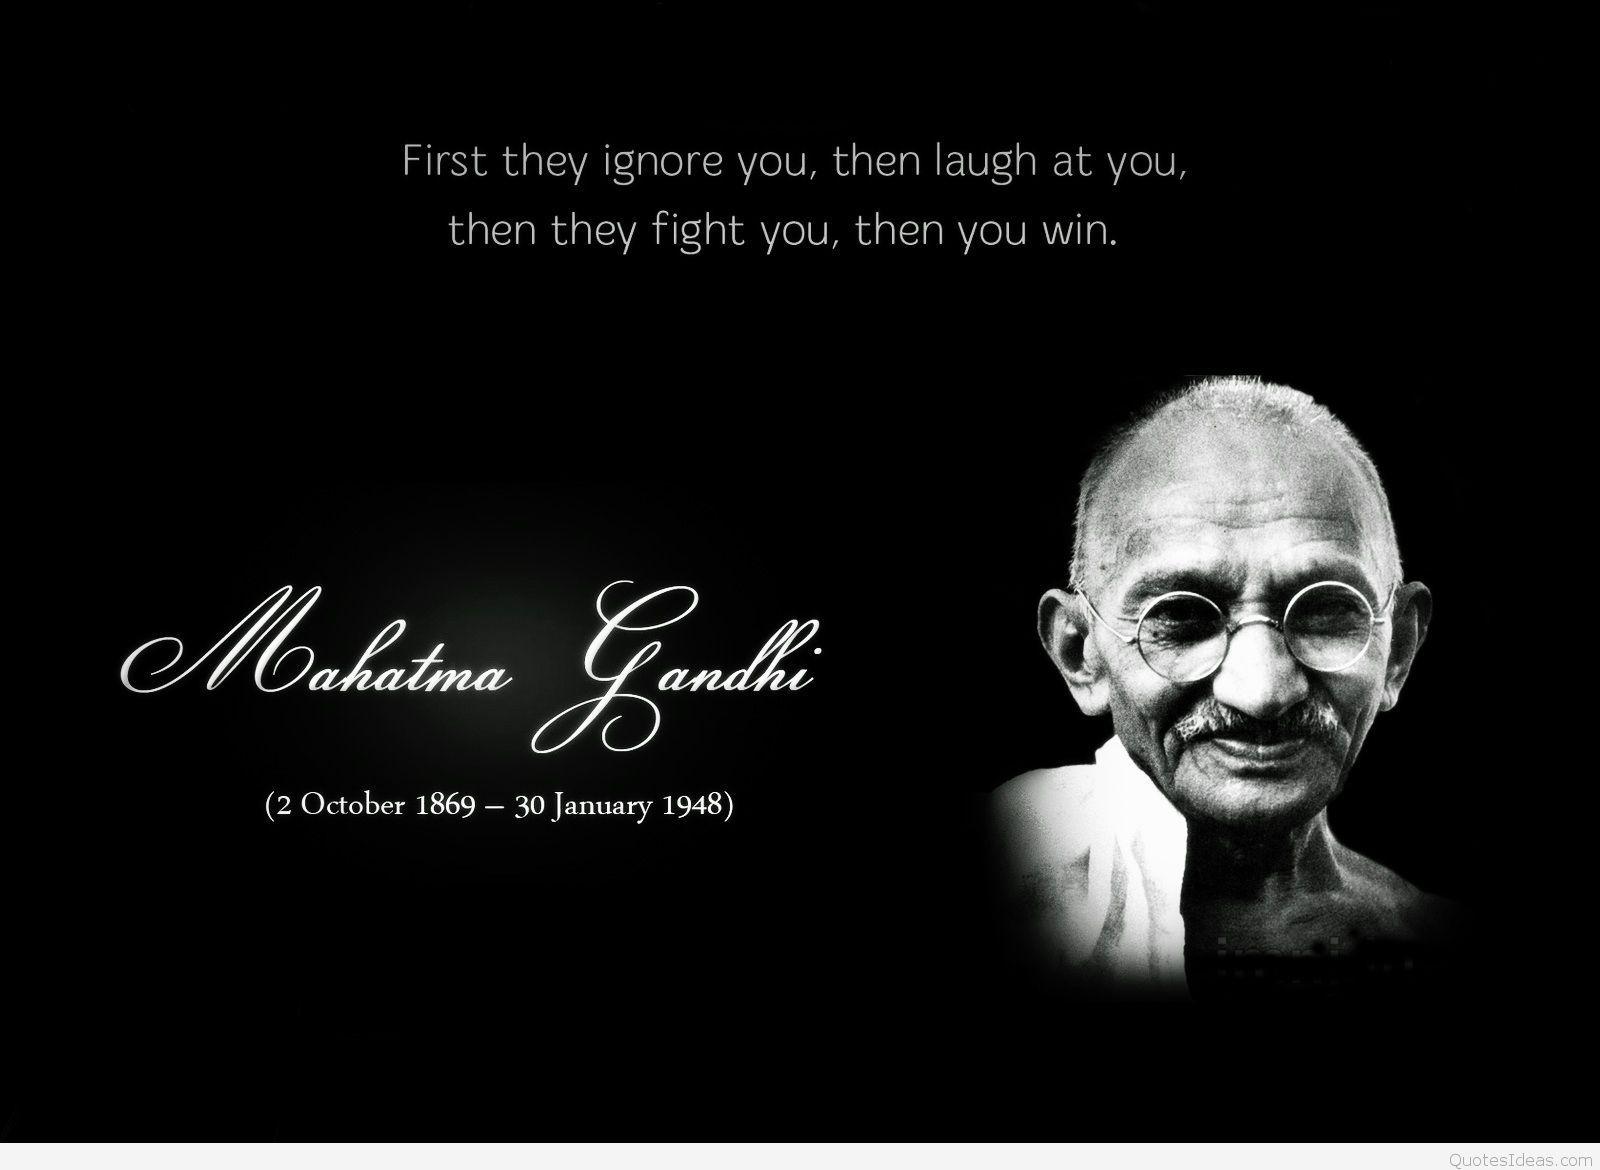 Best quote on HD wallpaper with Gandhi